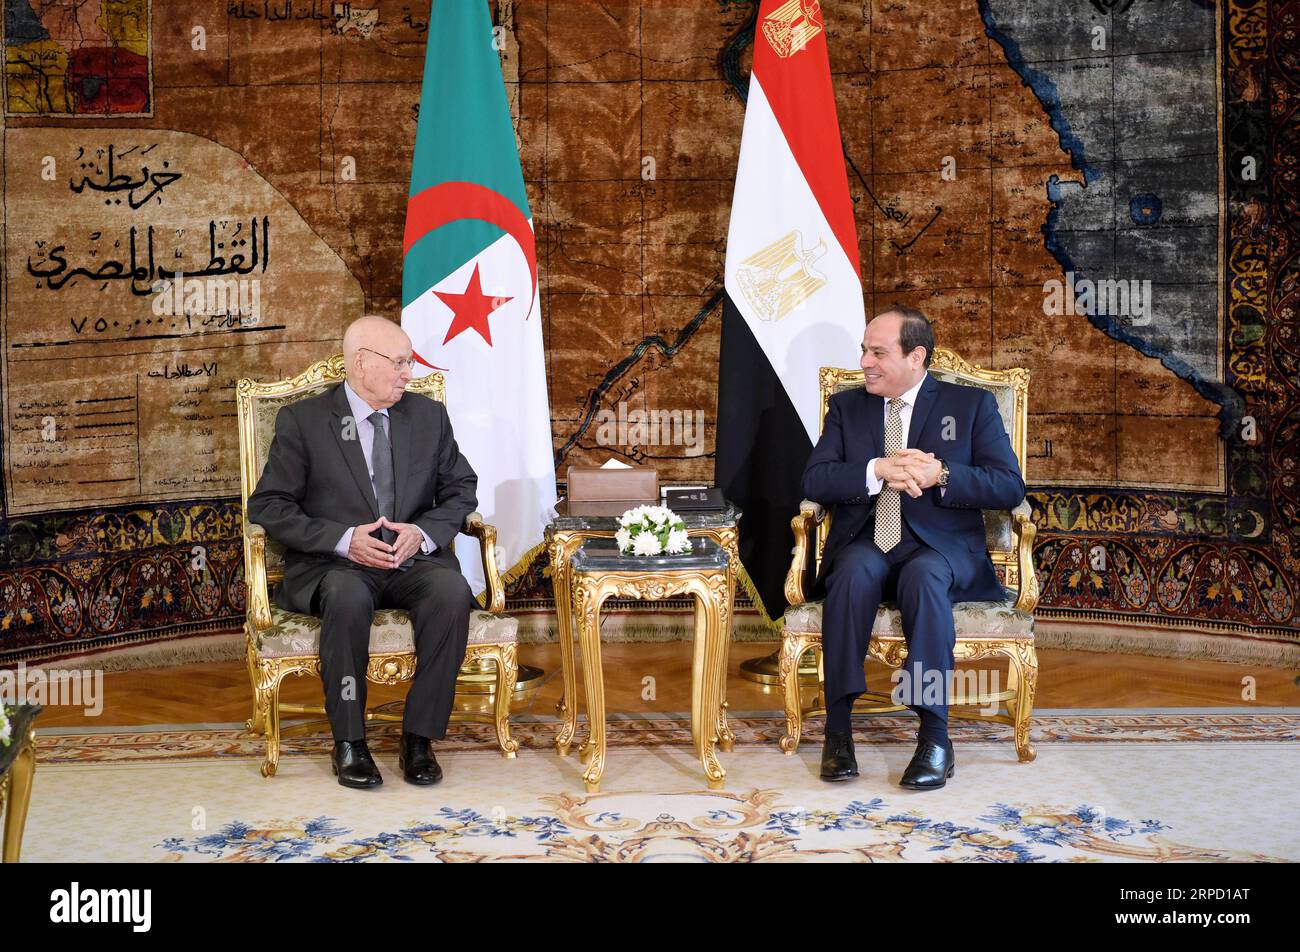 (190718) -- CAIRO, July 18, 2019 -- Egyptian President Abdel-Fattah al-Sisi (R) meets with visiting Algeria s interim President Abdelkader Bensalah in Cairo, Egypt on July 18, 2019. Algeria s interim President Abdelkader Bensalah arrived here Thursday to support his country s team against Senegal in the 2019 Africa Cup of Nations (AFCON) final, official news agency reported. ( via Xinhua) EGYPT-CAIRO-ALGERIA S INTERIM PRESIDENT-VISIT MENA PUBLICATIONxNOTxINxCHN Stock Photo